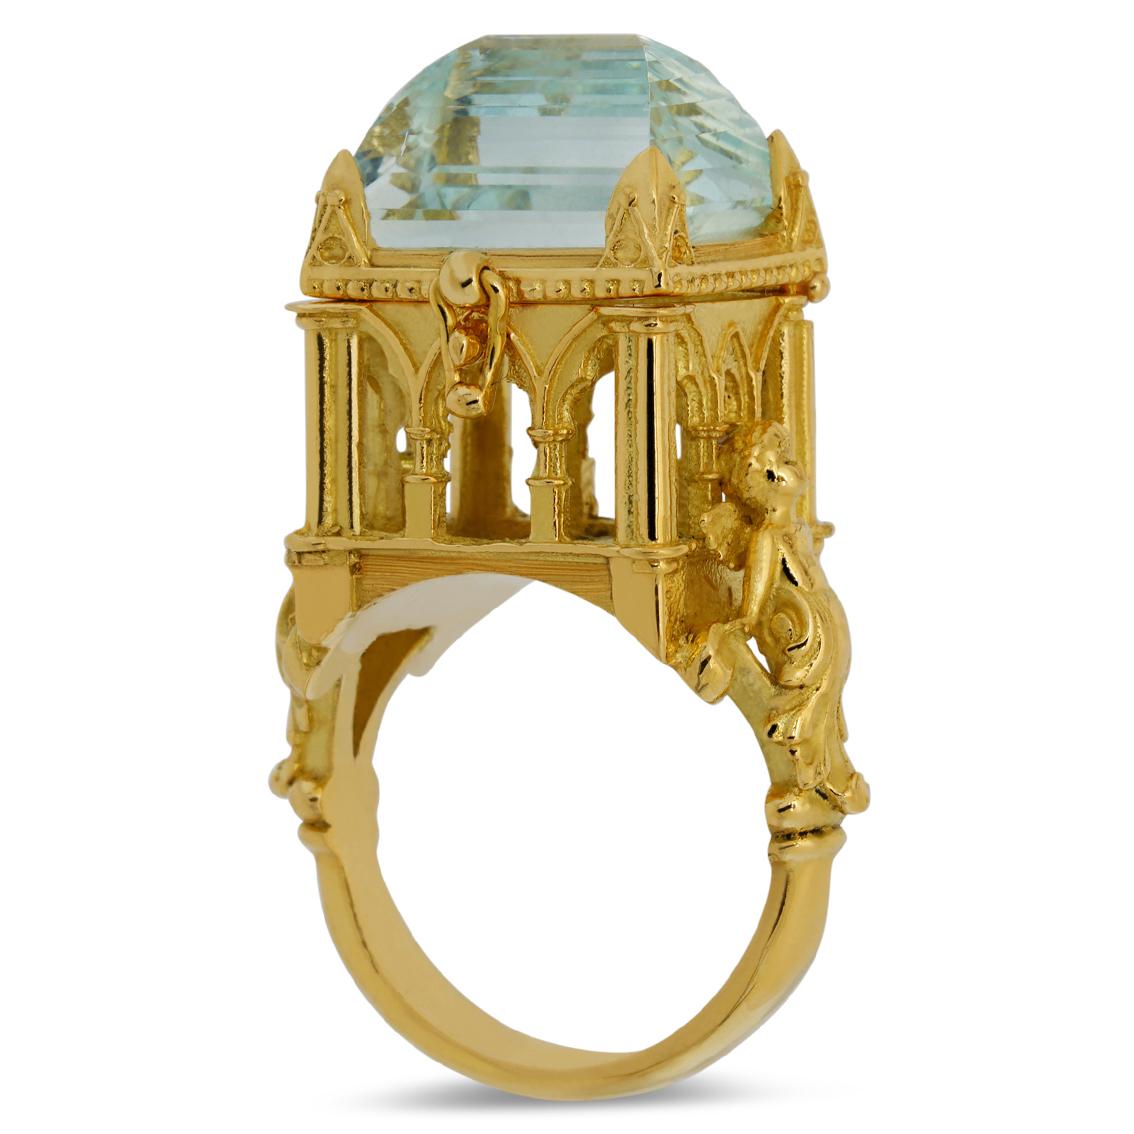 Emerald Cut Galerie des Glaces Cathedral Poison Ring in 18 Karat Yellow Gold with Aquamarine